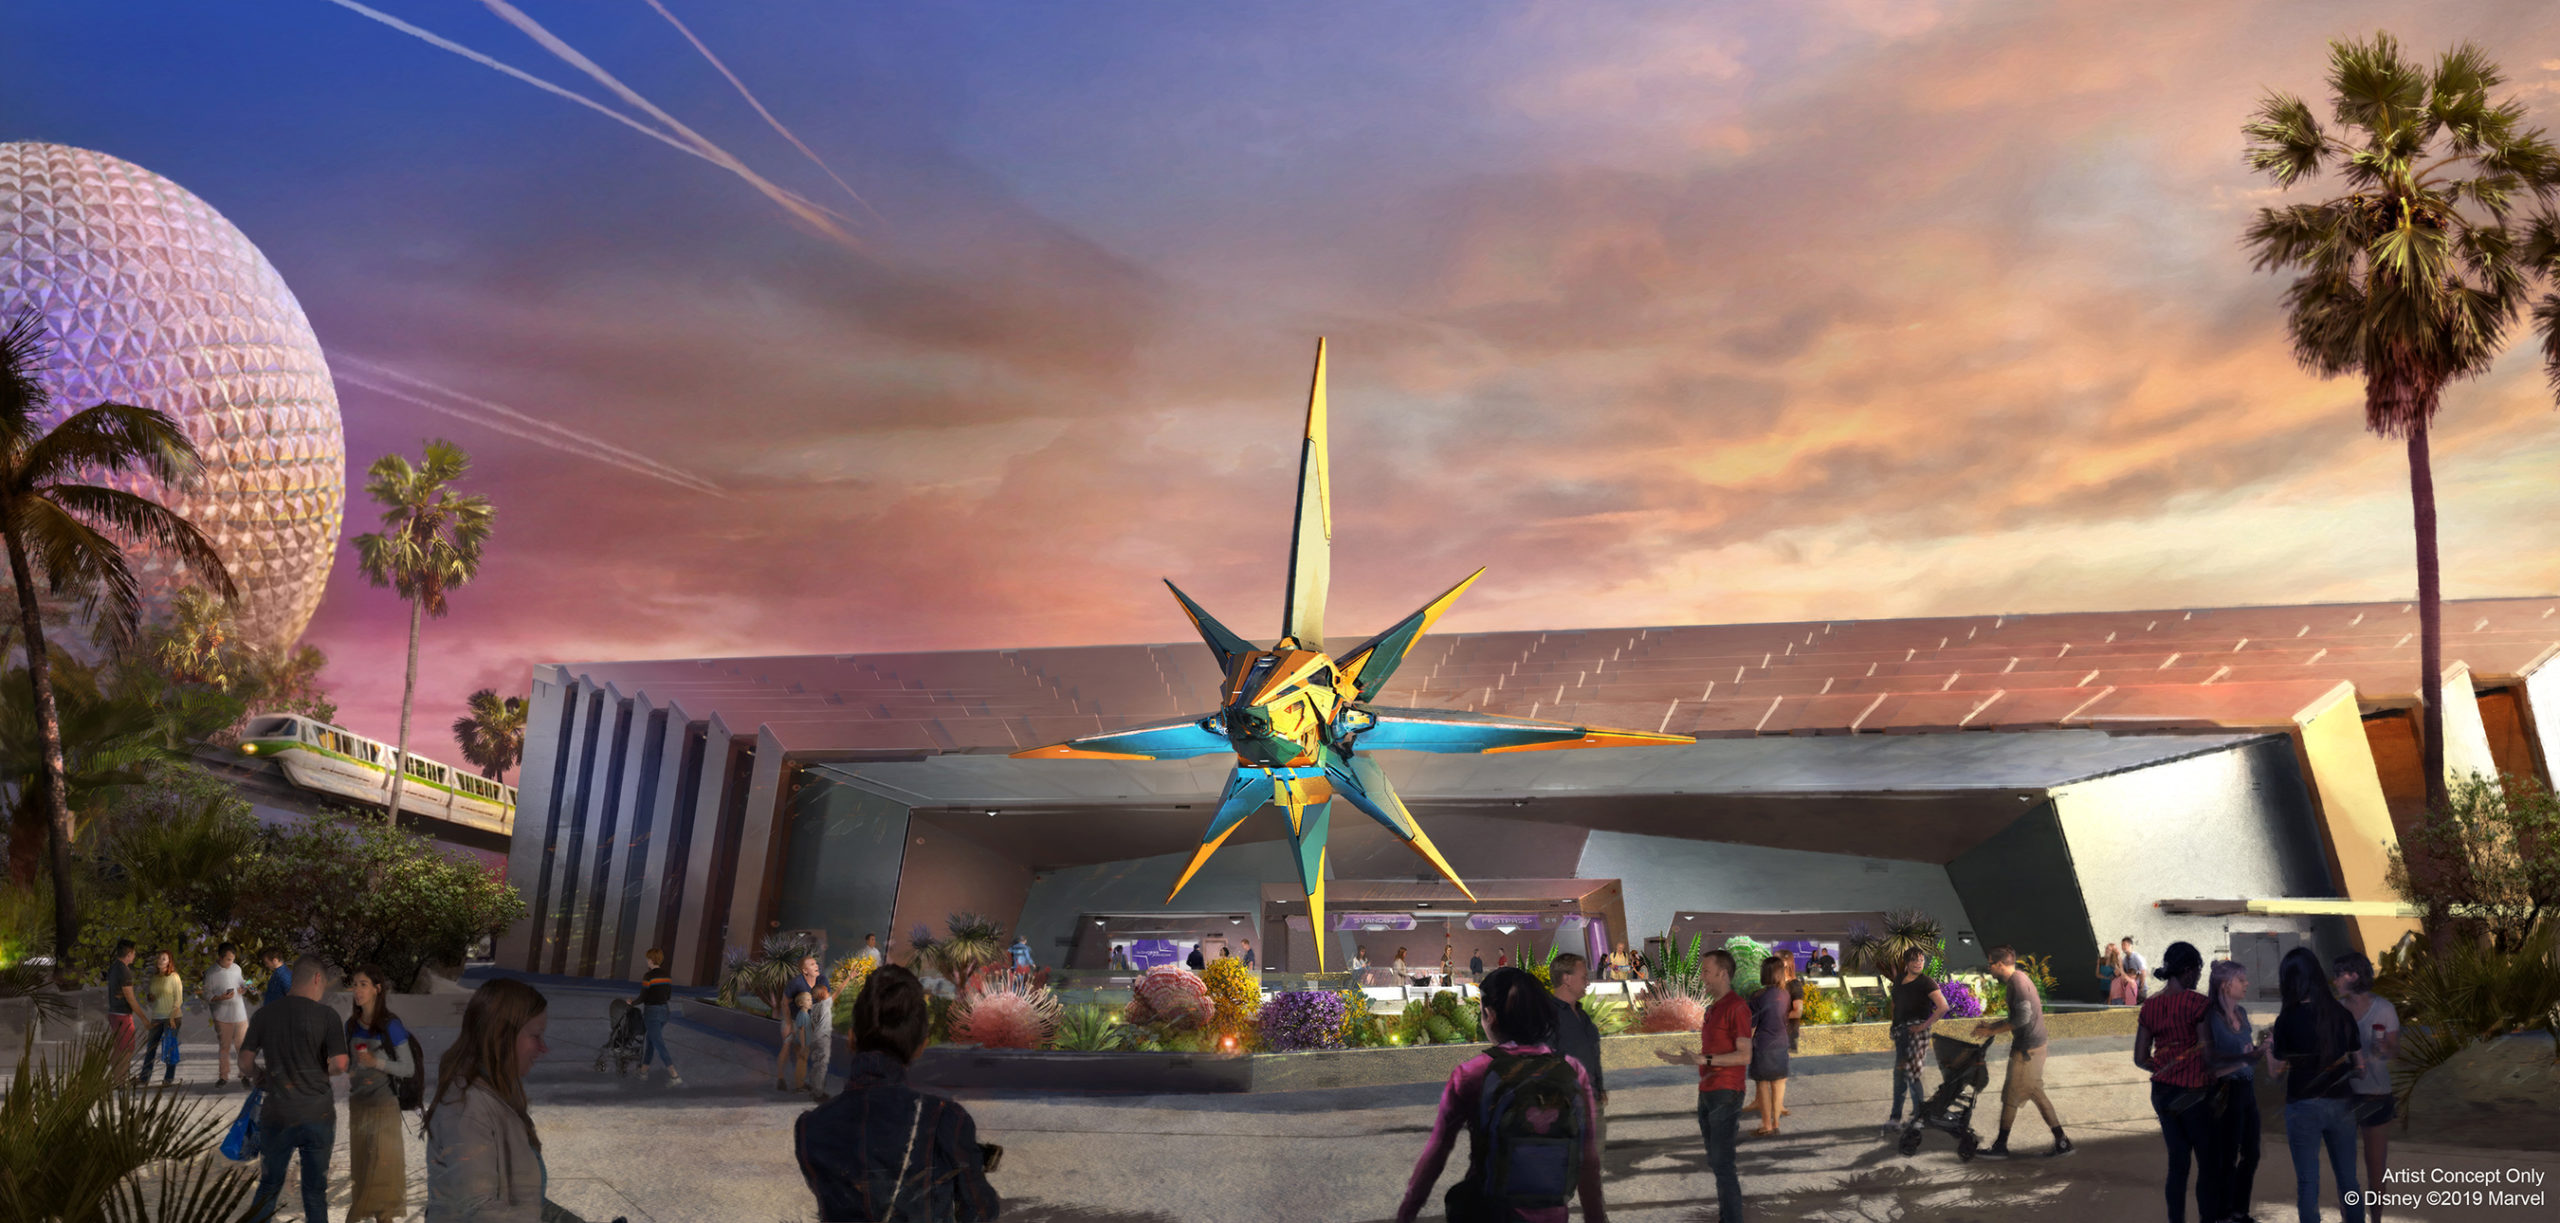 Disney clarifies some details on the transformation of EPCOT but raises more questions about what will be built